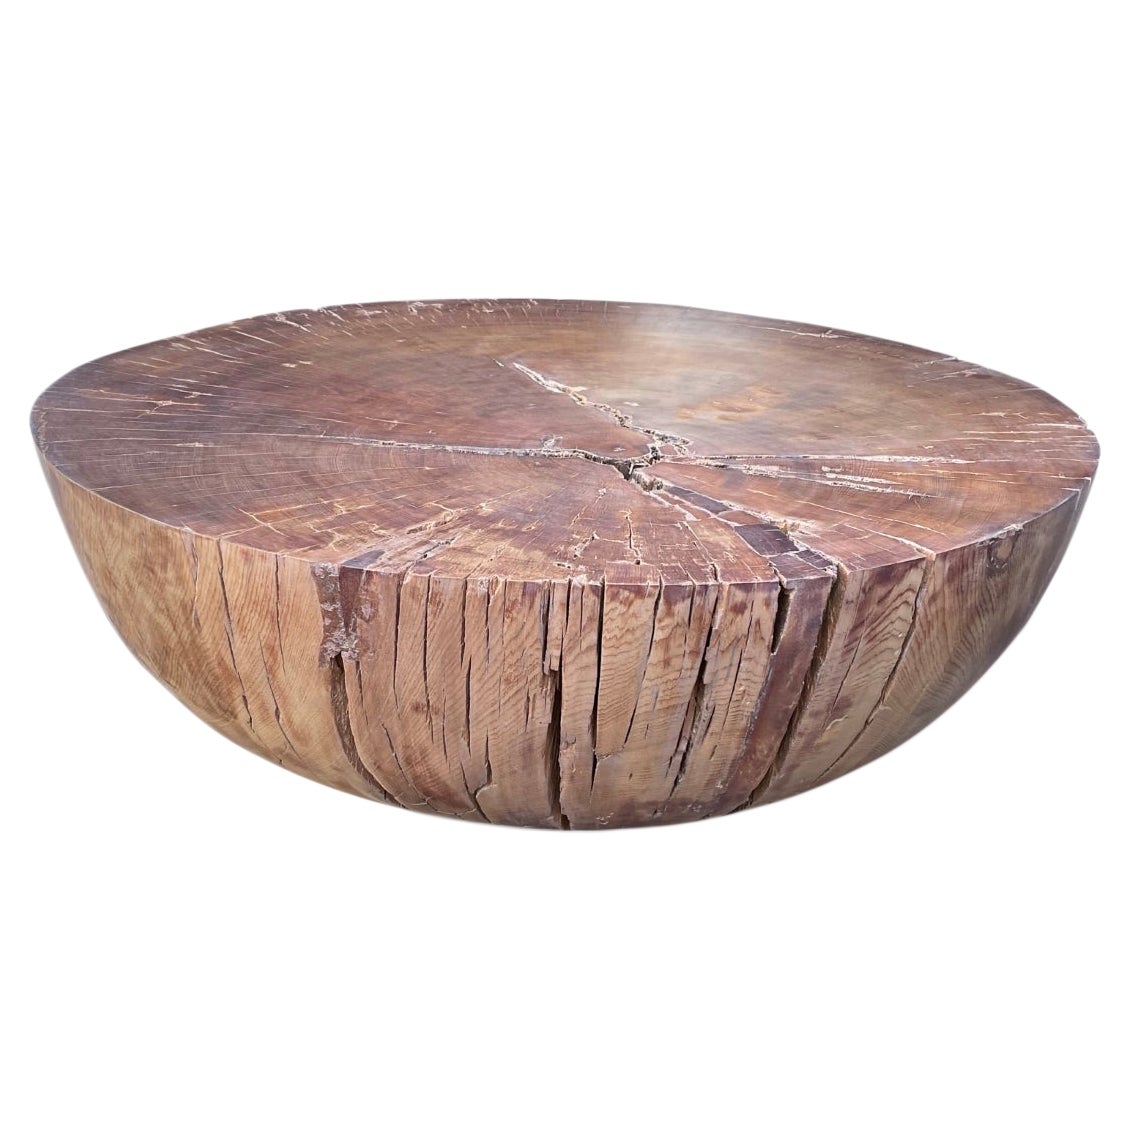 Modern Organic Drum Coffee Table made from New Zealand Ancient Swamp Kauri Wood